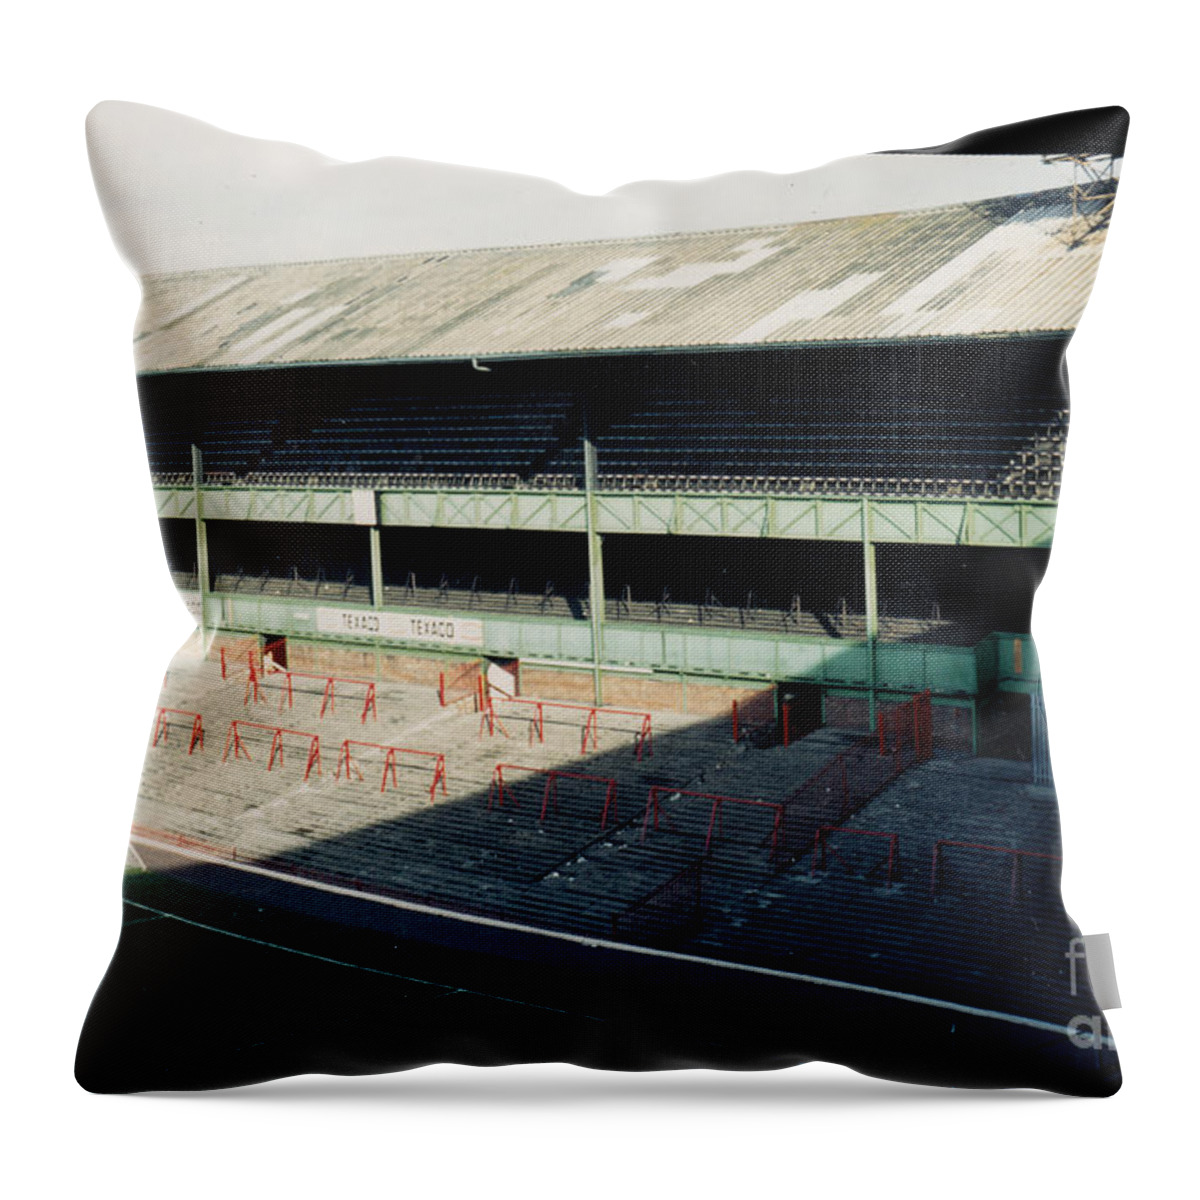 Derby County Throw Pillow featuring the photograph Derby County - The Baseball Ground - North Stand Osmanston End 1 - September 1970 by Legendary Football Grounds